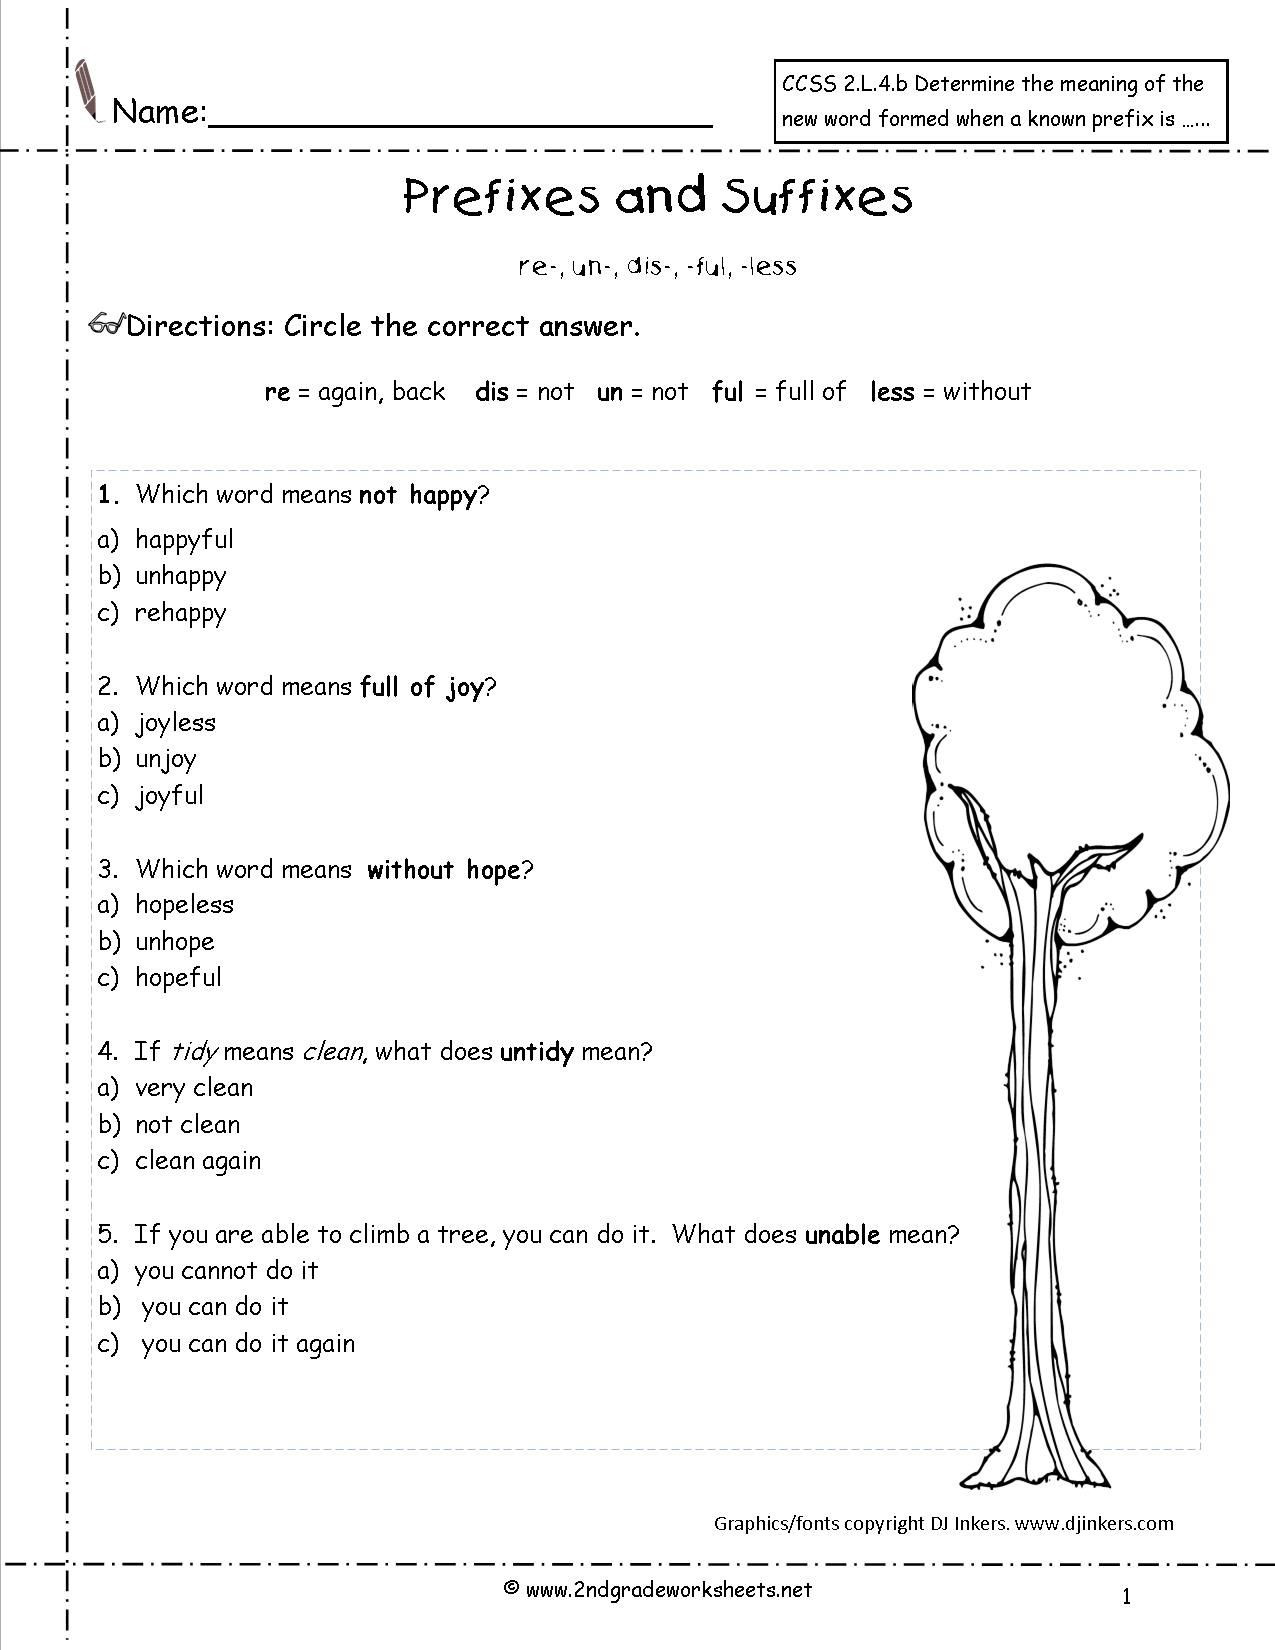 Suffixes Worksheets for 2nd Grade Prefixes Suffixes Worksheet